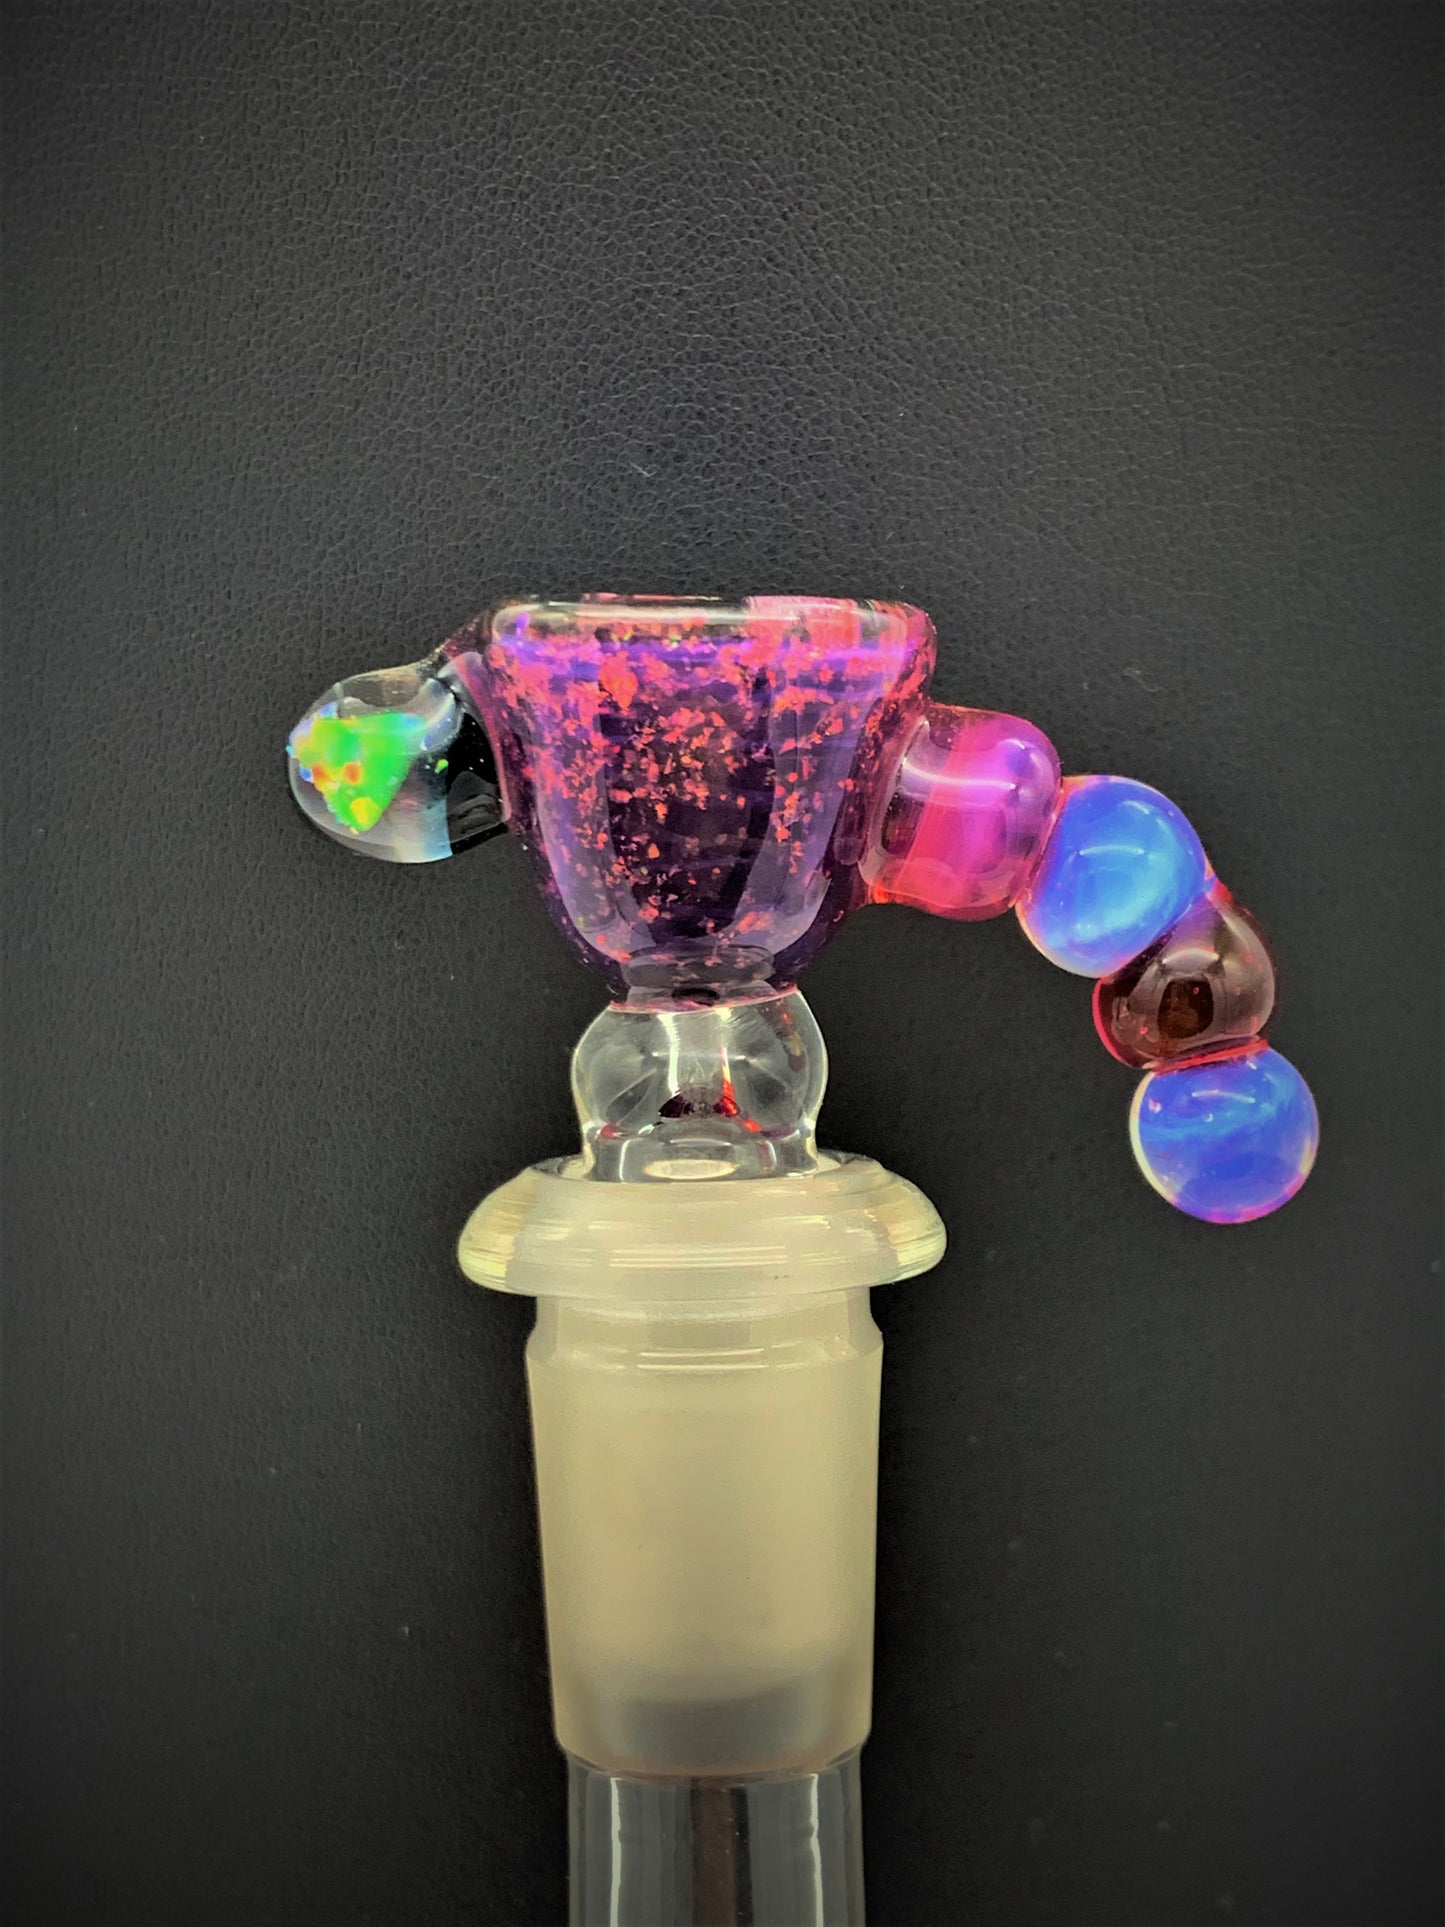 Space Galaxy Themed Karmaline over Crushed Opal with Opal 14mm Bowl / Slide